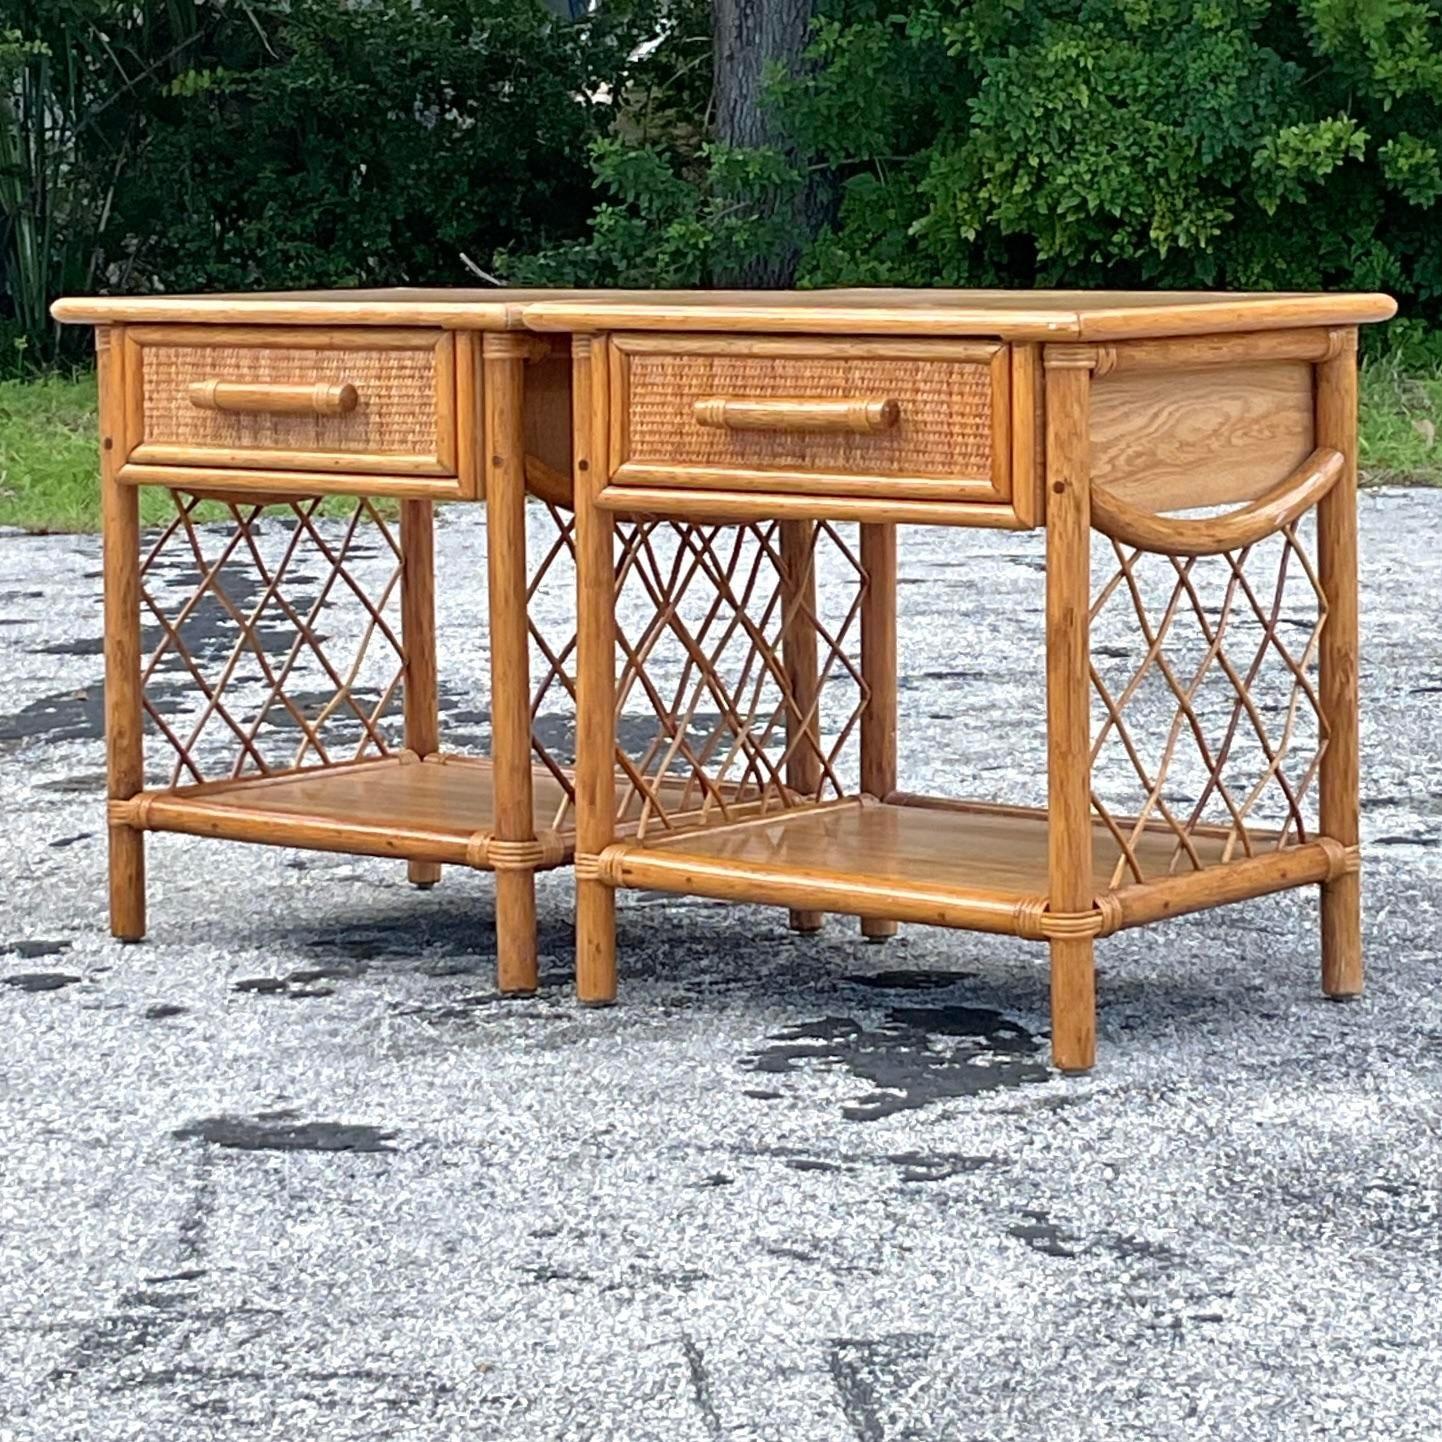 A fabulous pair of vintage Coastal nightstands. Chic frame rattan with inset woven rattan panels. Laminate surface for extra durability. Functional and good looking! Acquired from a Palm Beach estate.